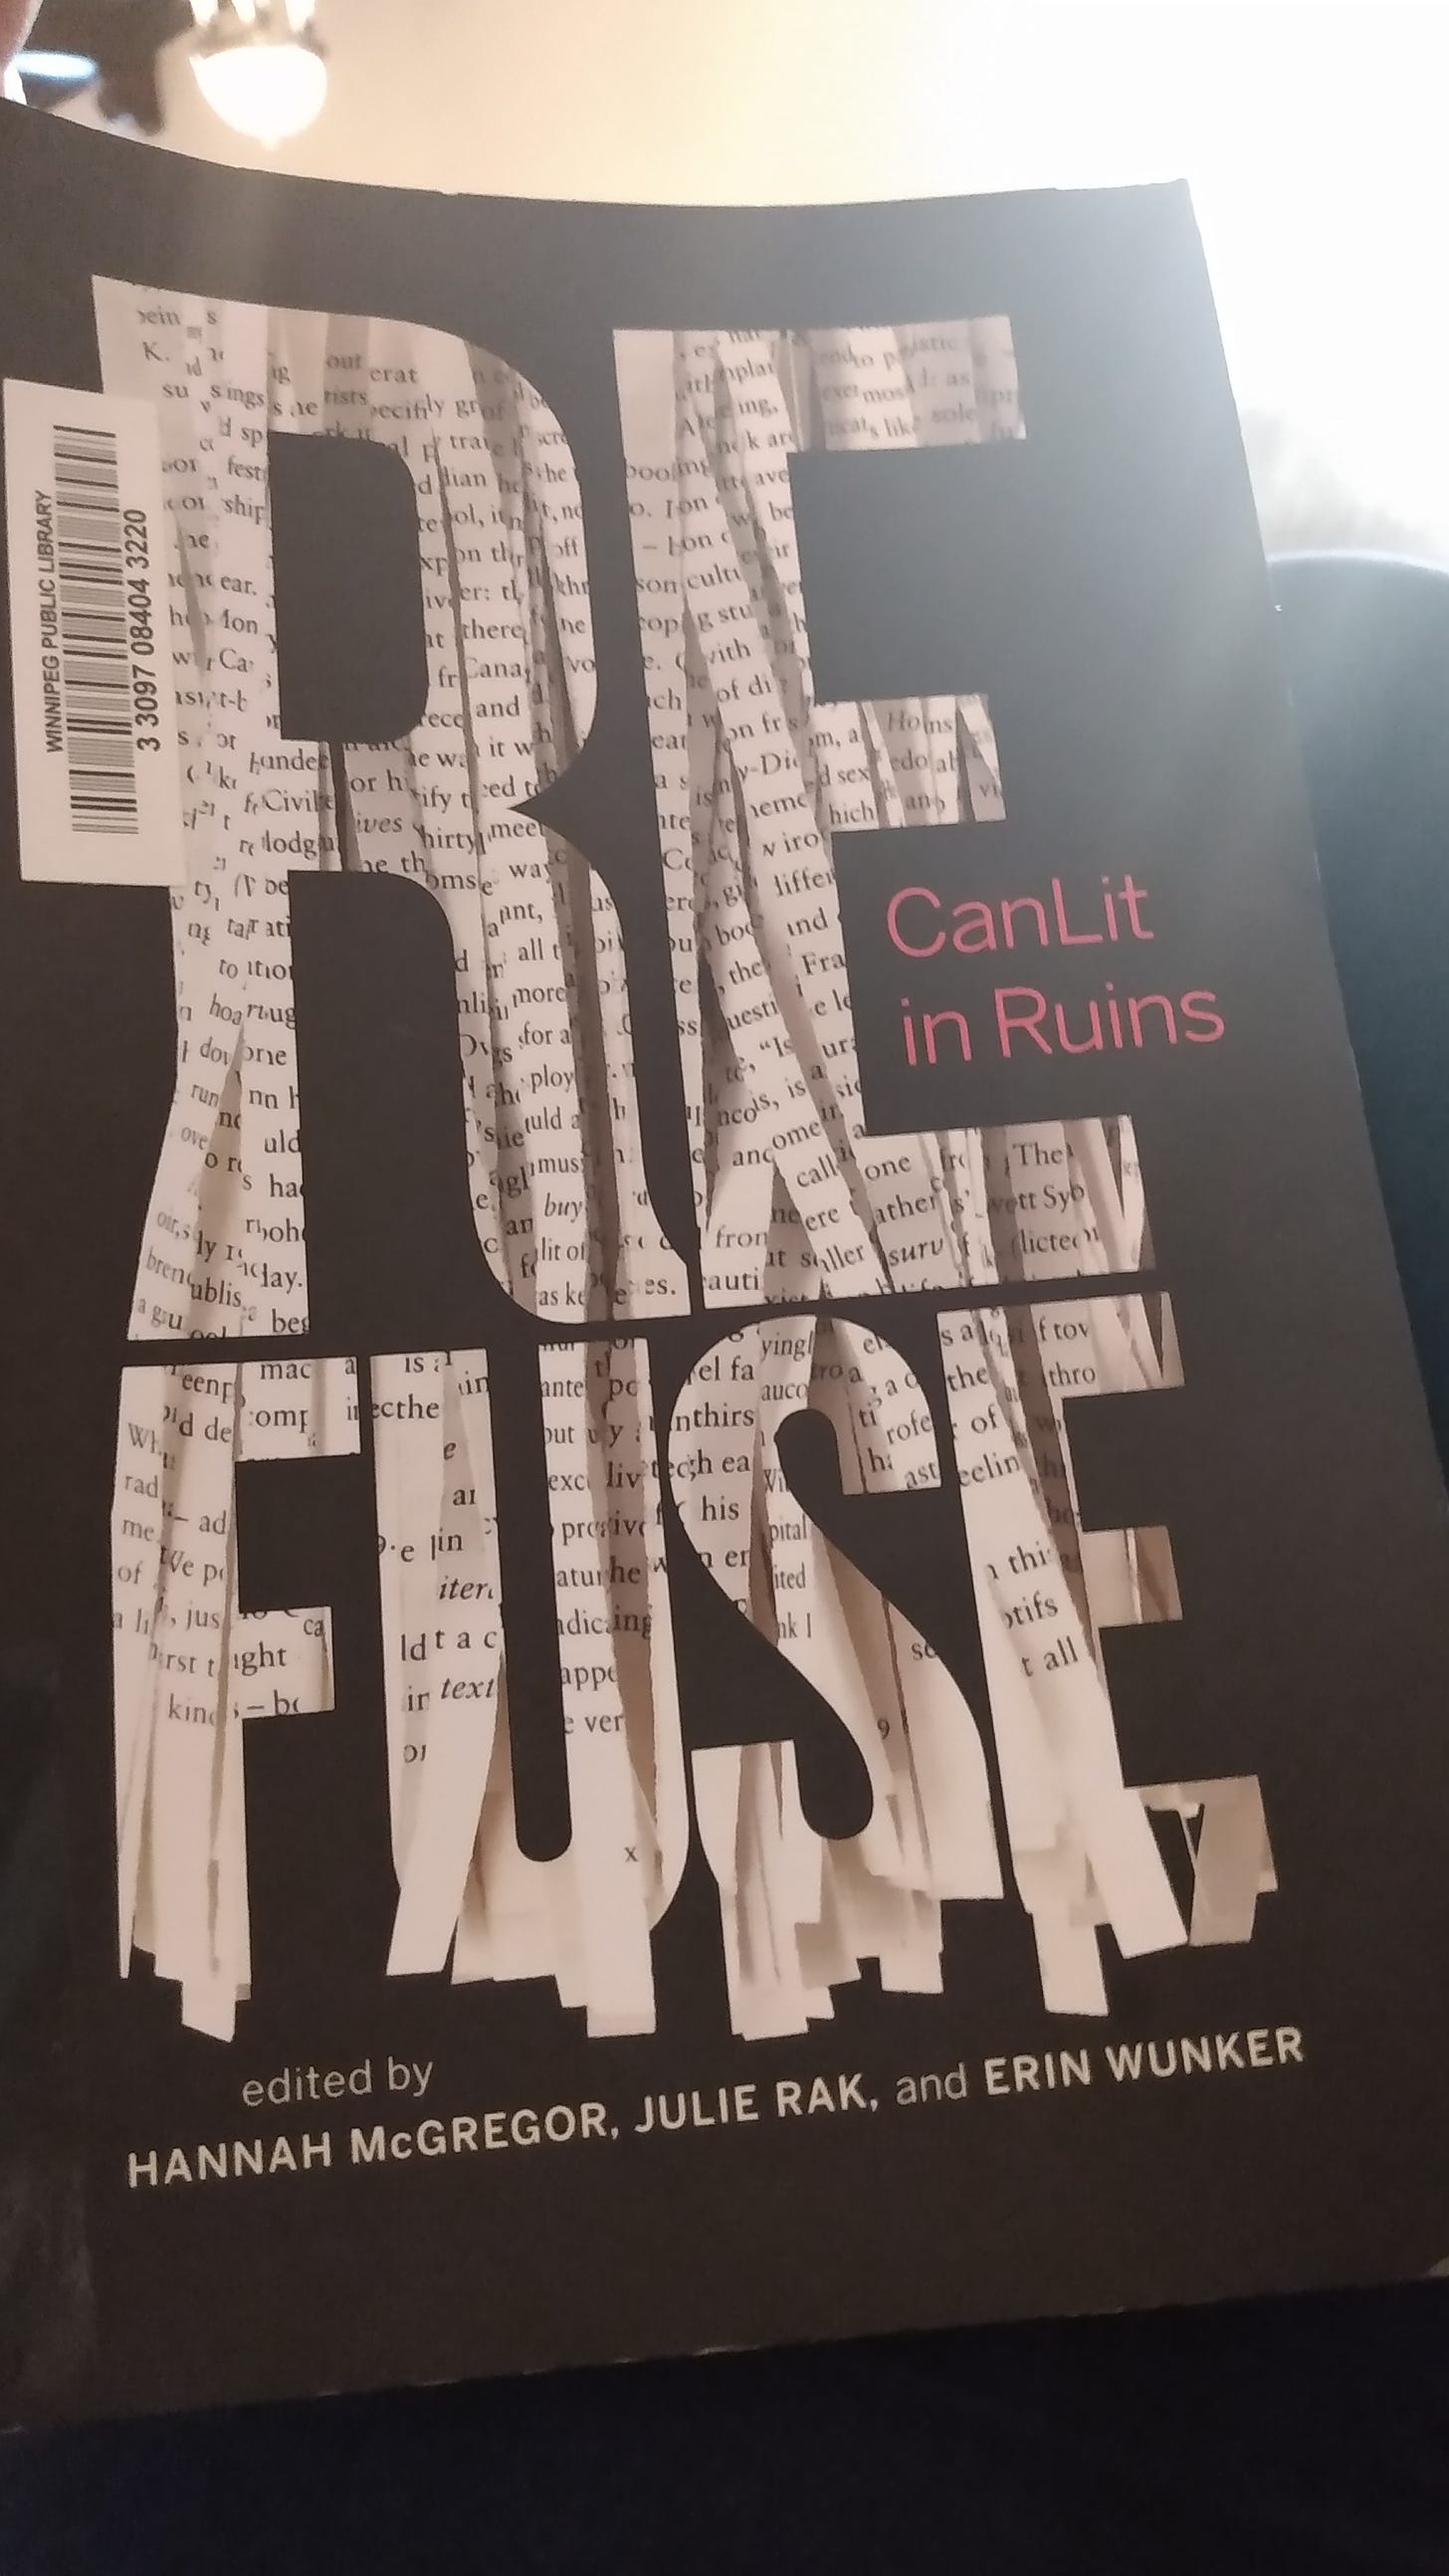 Refuse: CanLit in Ruins